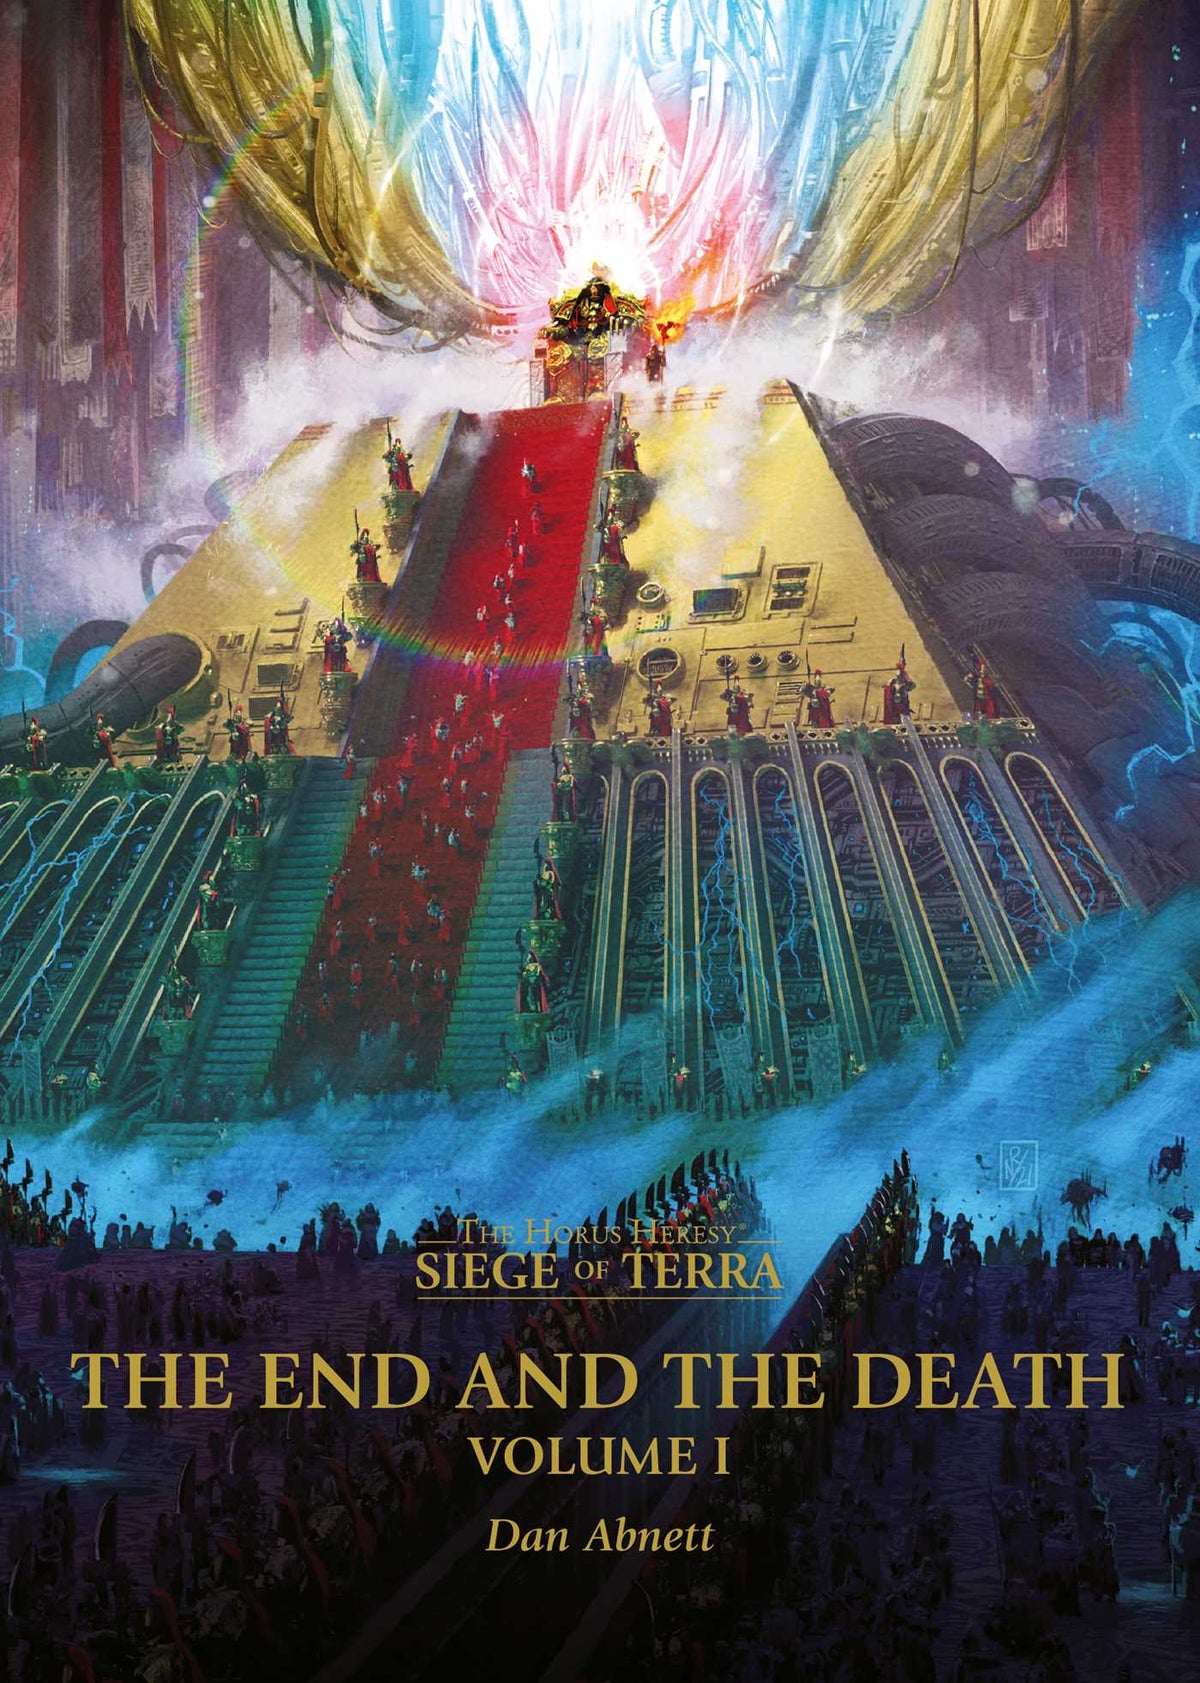 Siege of Terra: The End and the Death Volume 1 (Novel HB)